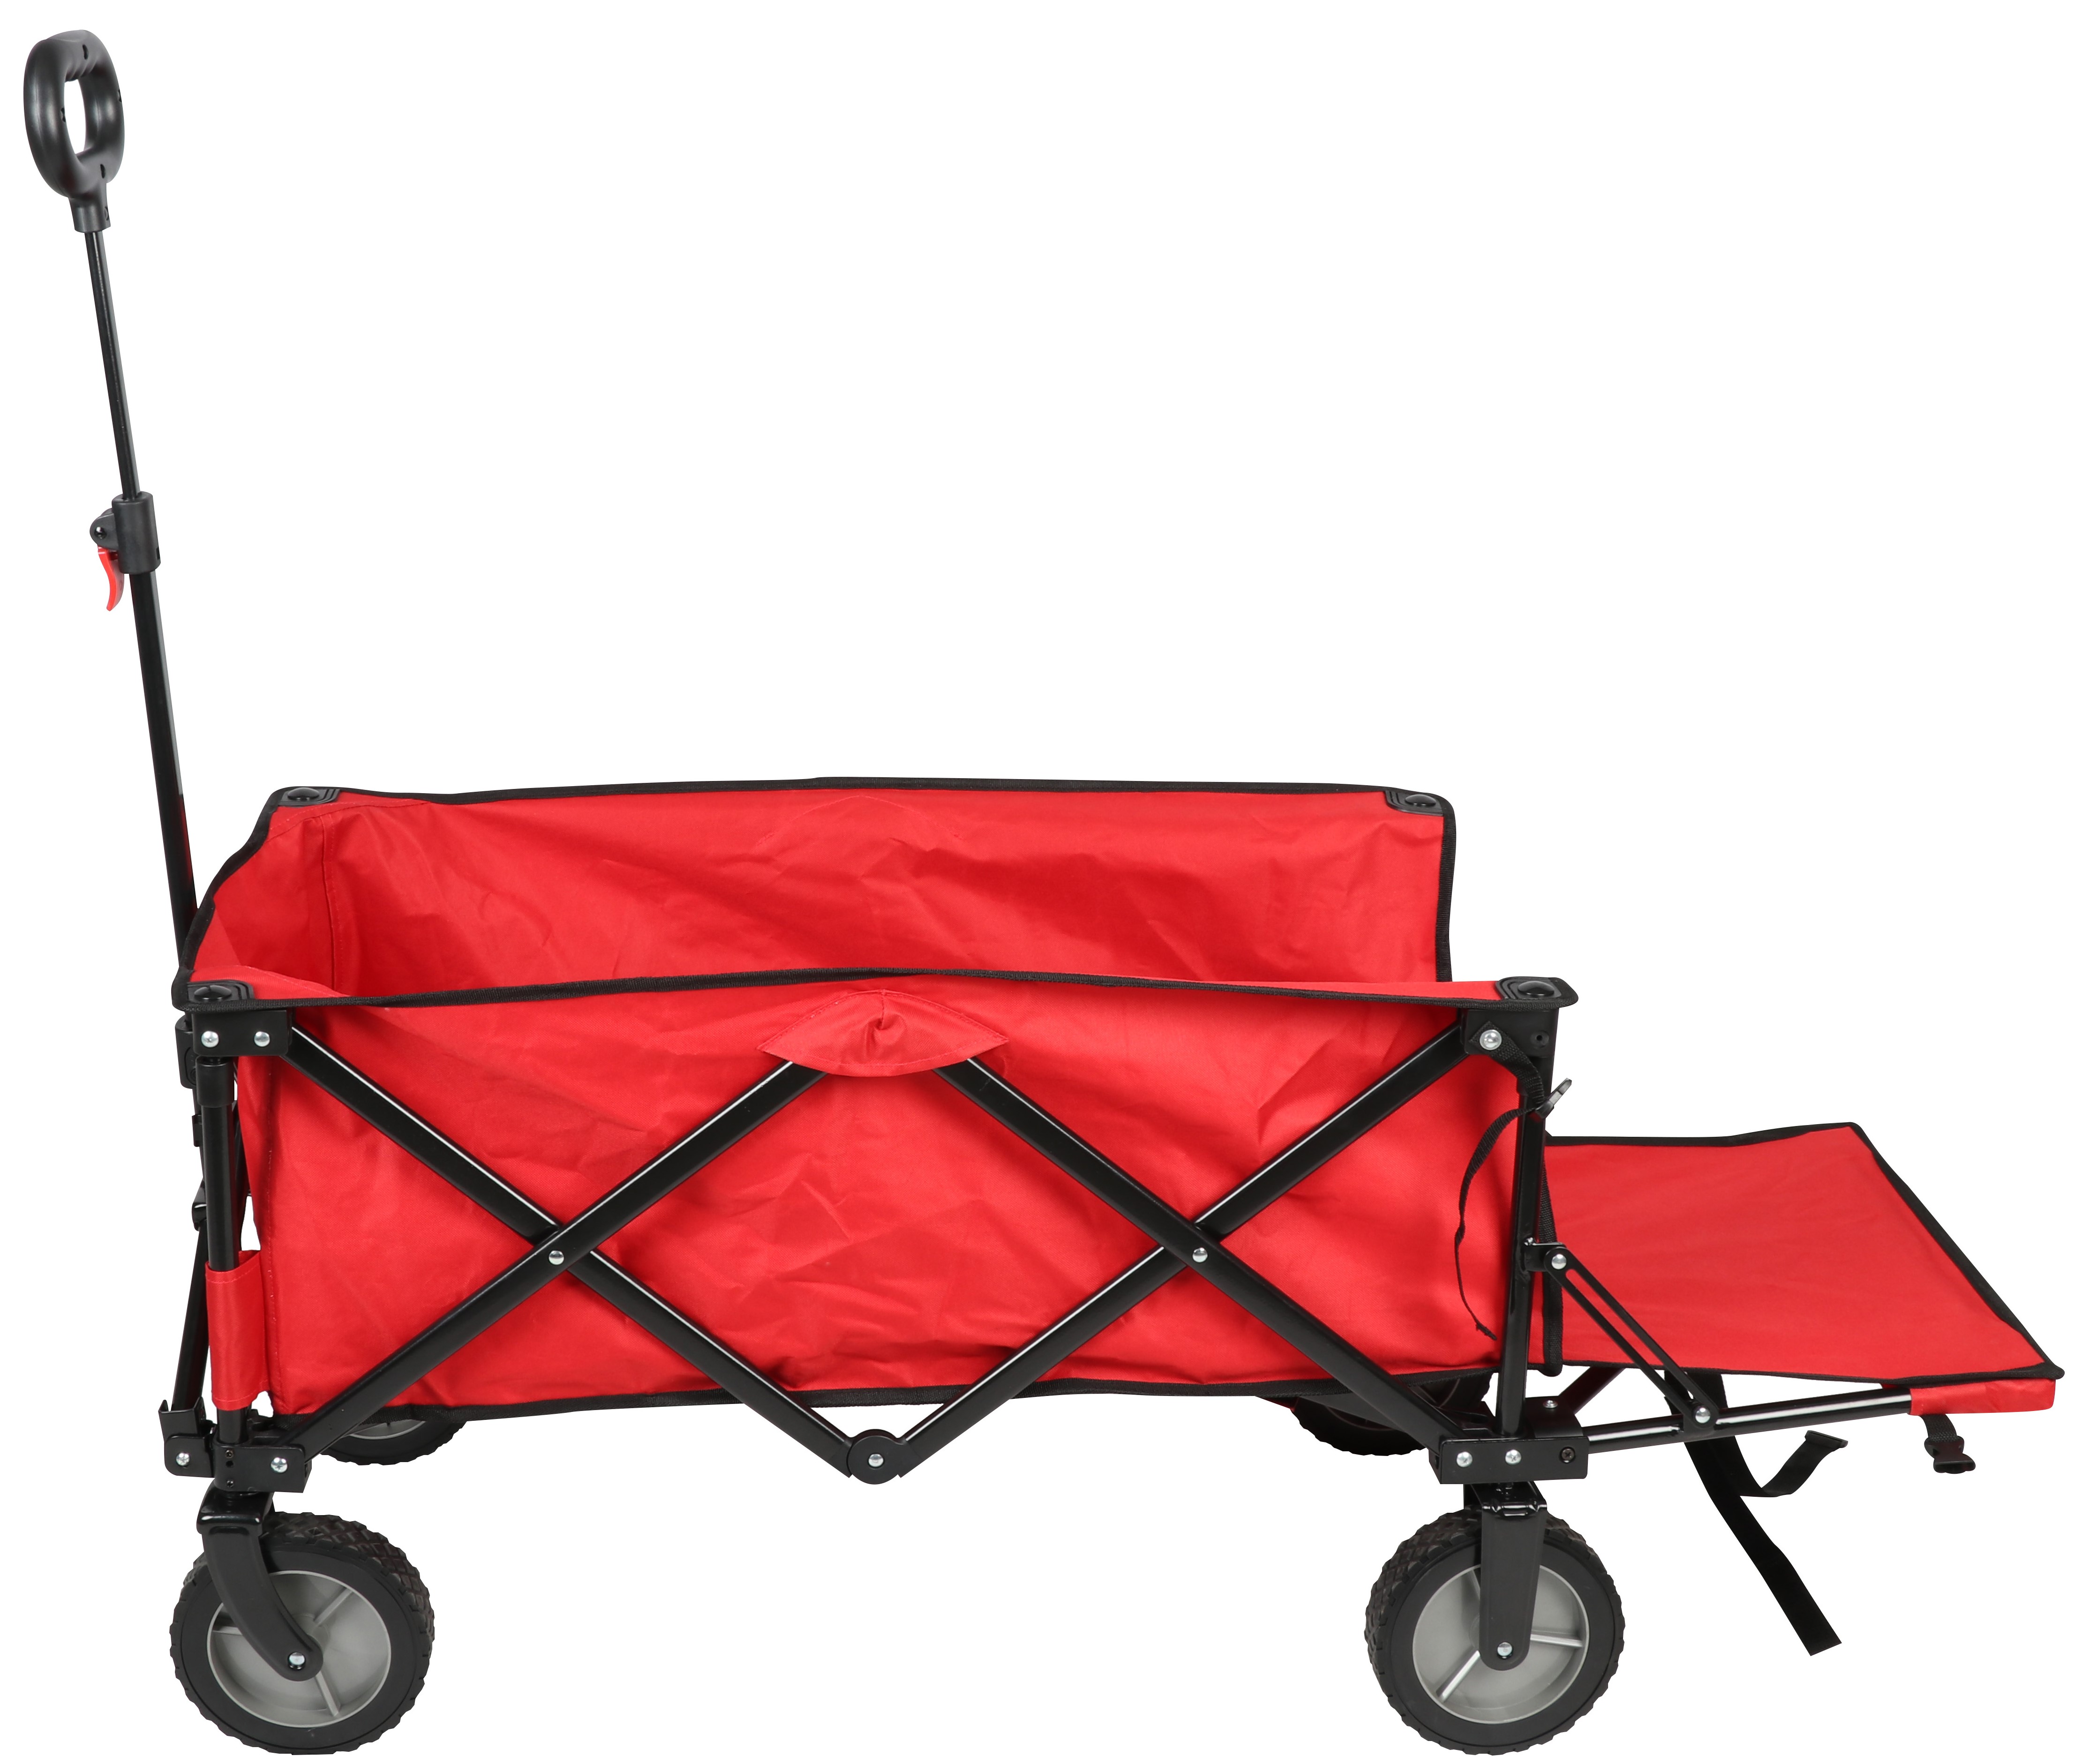 Ozark Trail Camping Utility Wagon with Tailgate & Extension Handle, Red - image 2 of 10